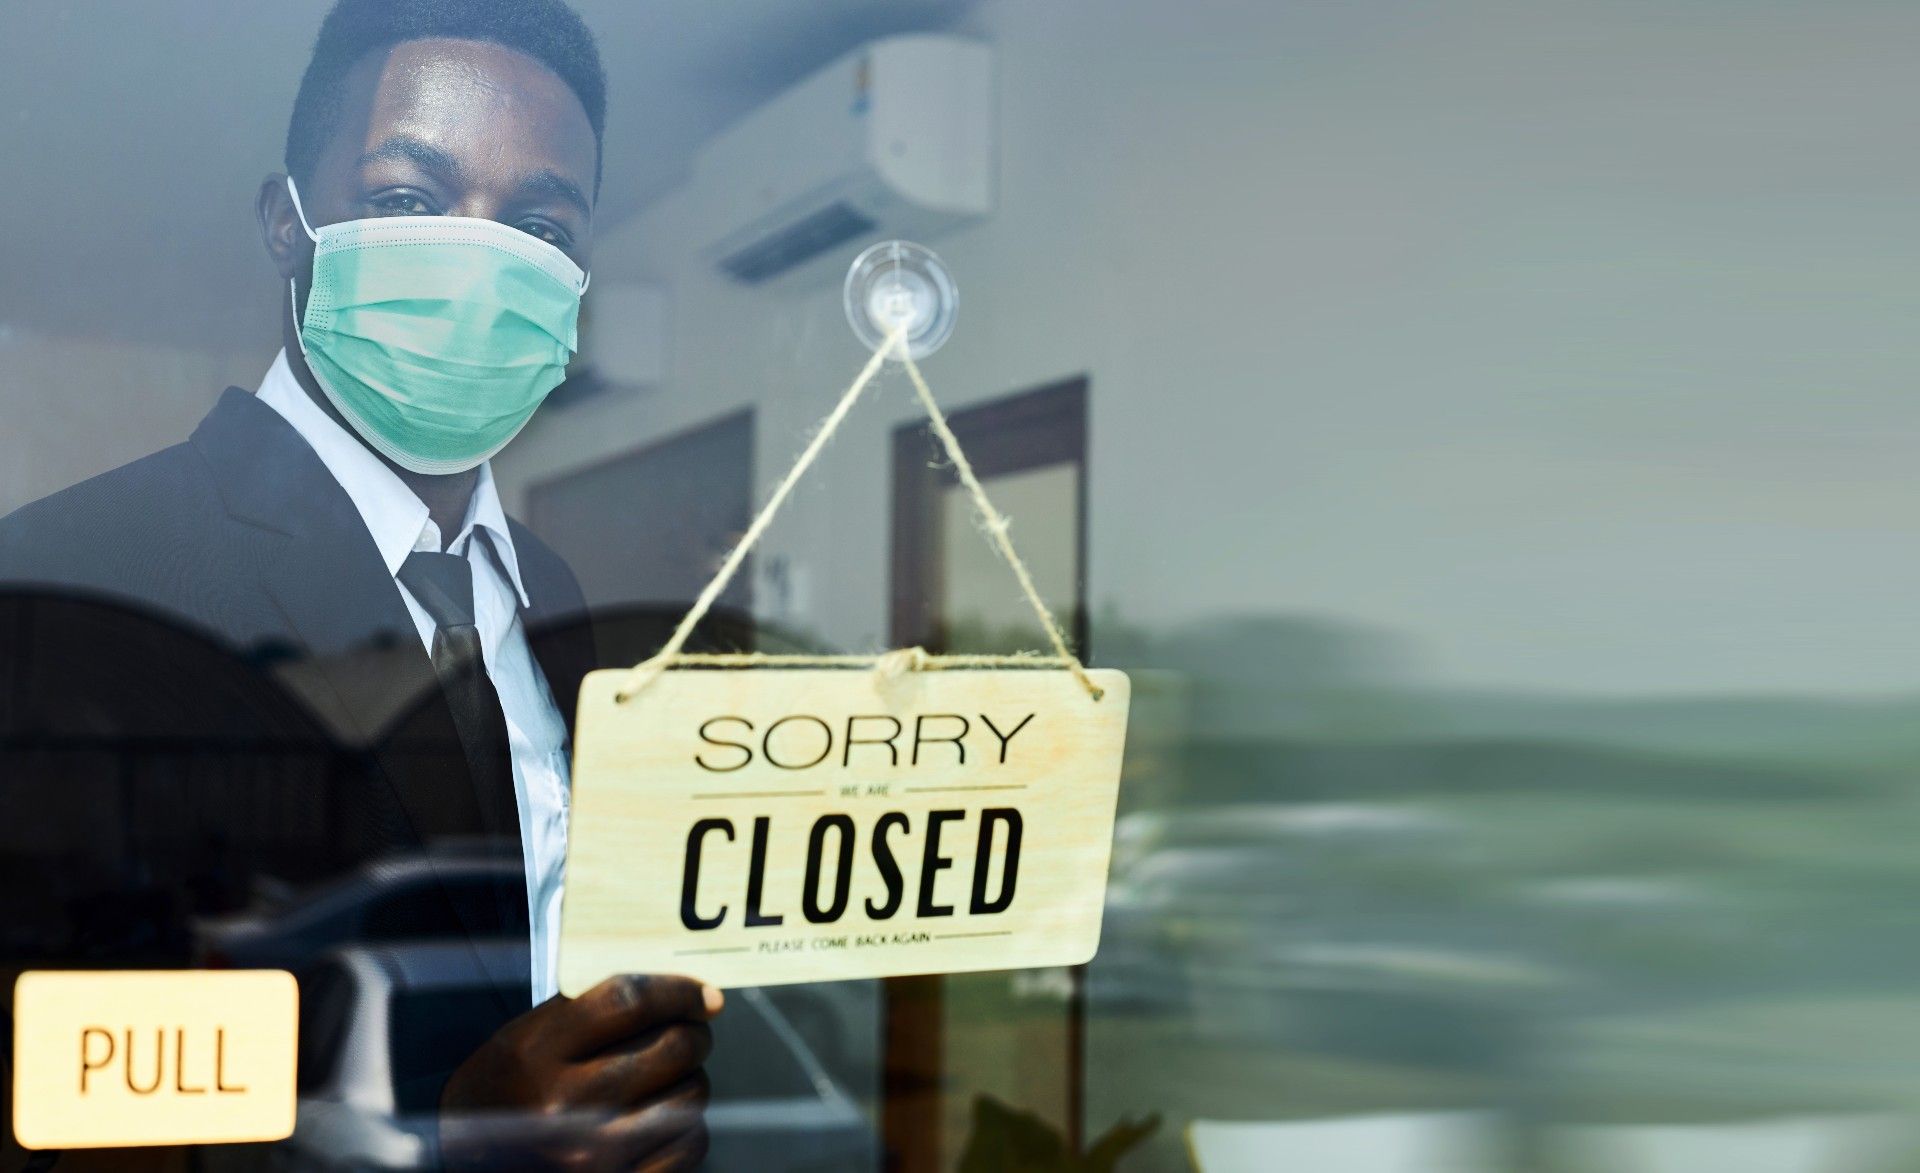 A Black businessman in a green face mask turns the sign on his business to read "Sorry We Are Closed Please Come Back Again" - Oregon Cares